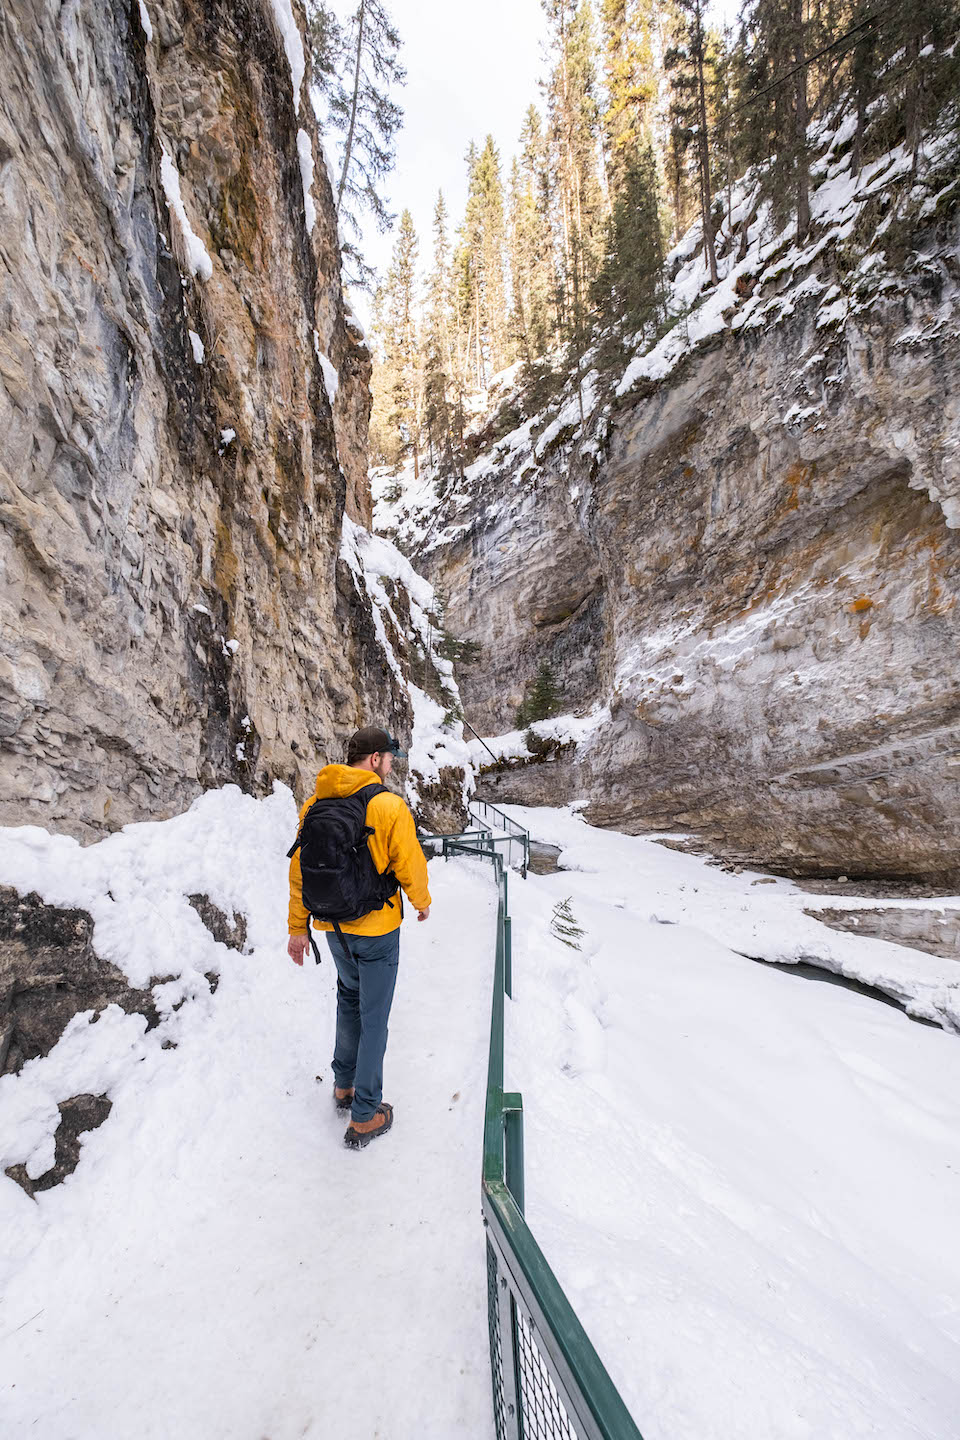 Johnston Canyon in February